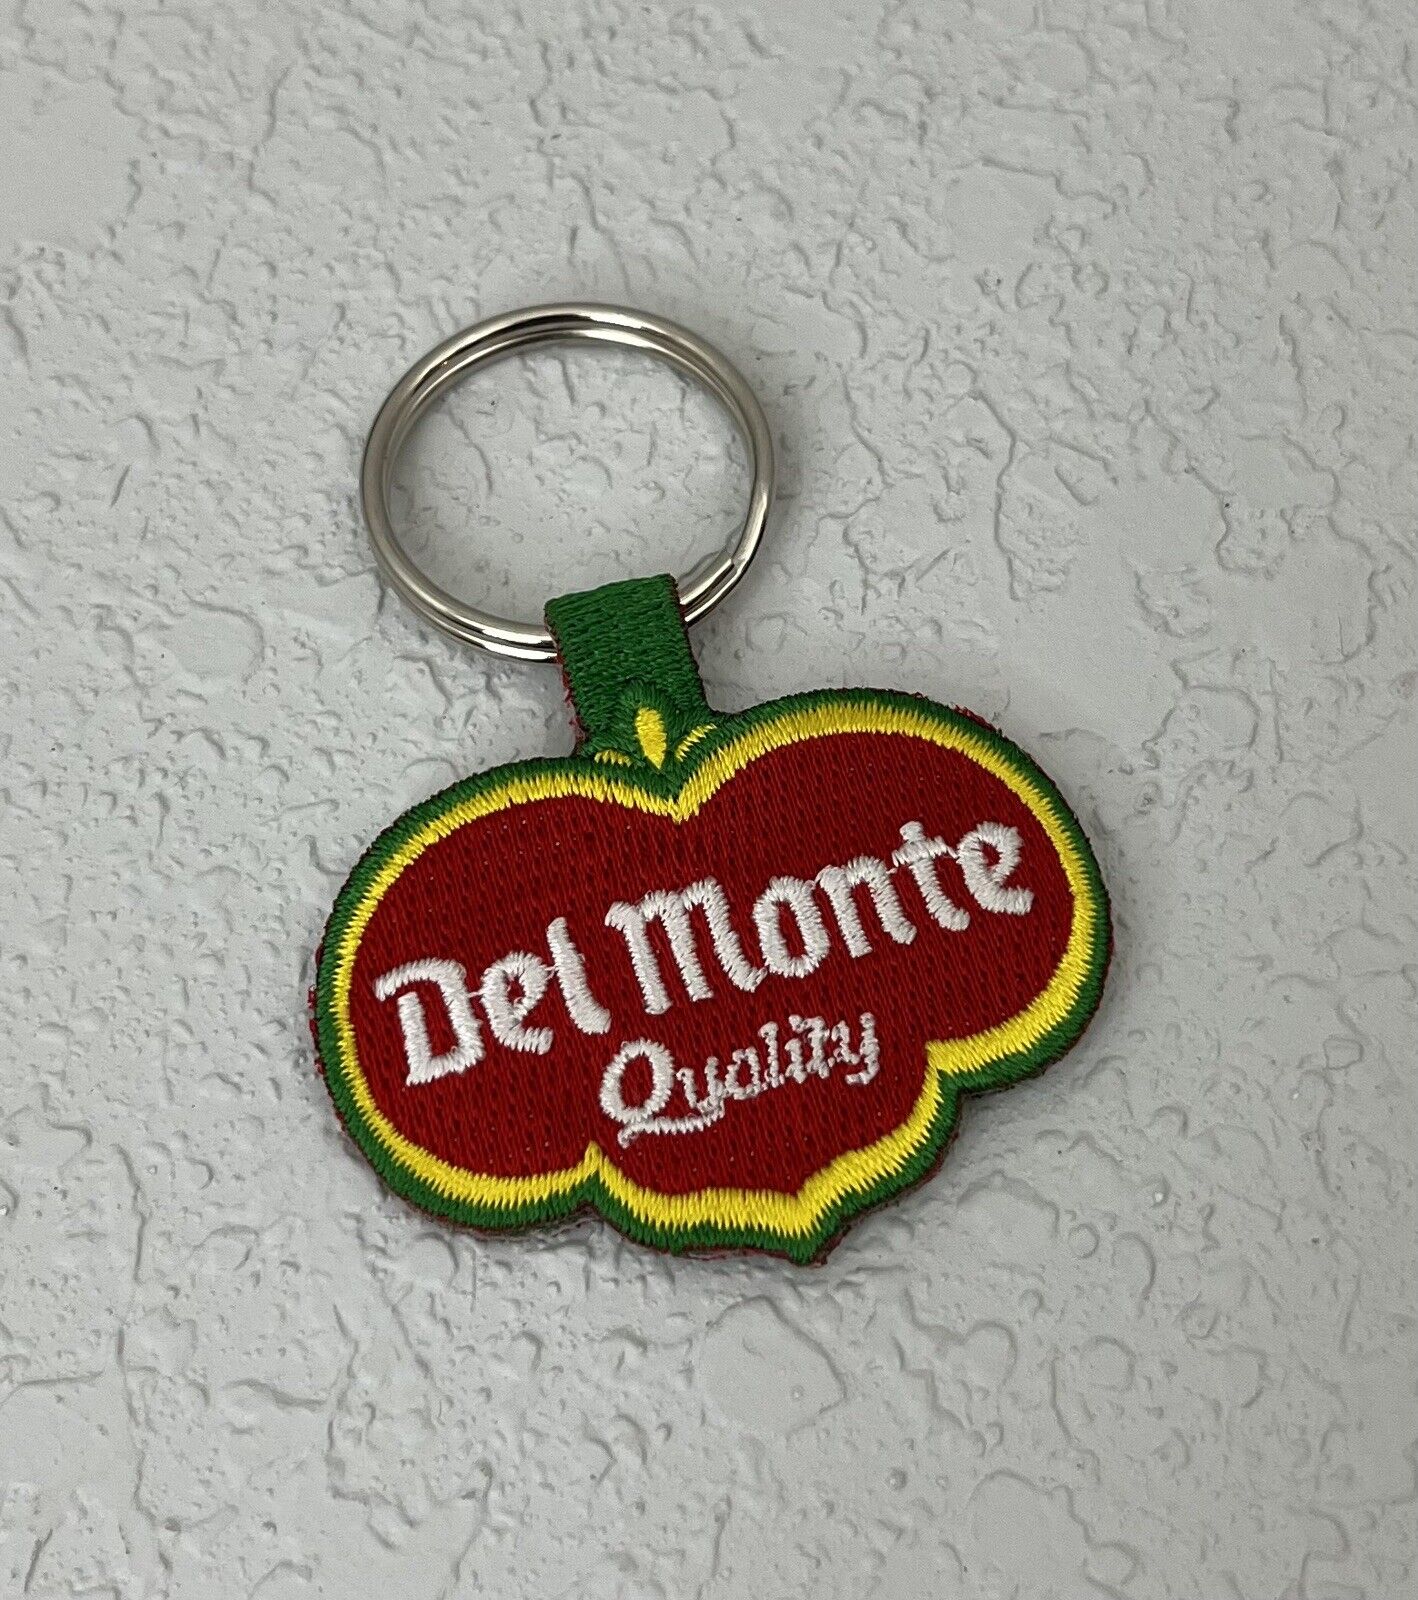 Vintage Del Monte Keychain Quality Fruit Company Advertising Cloth Patch Keyring